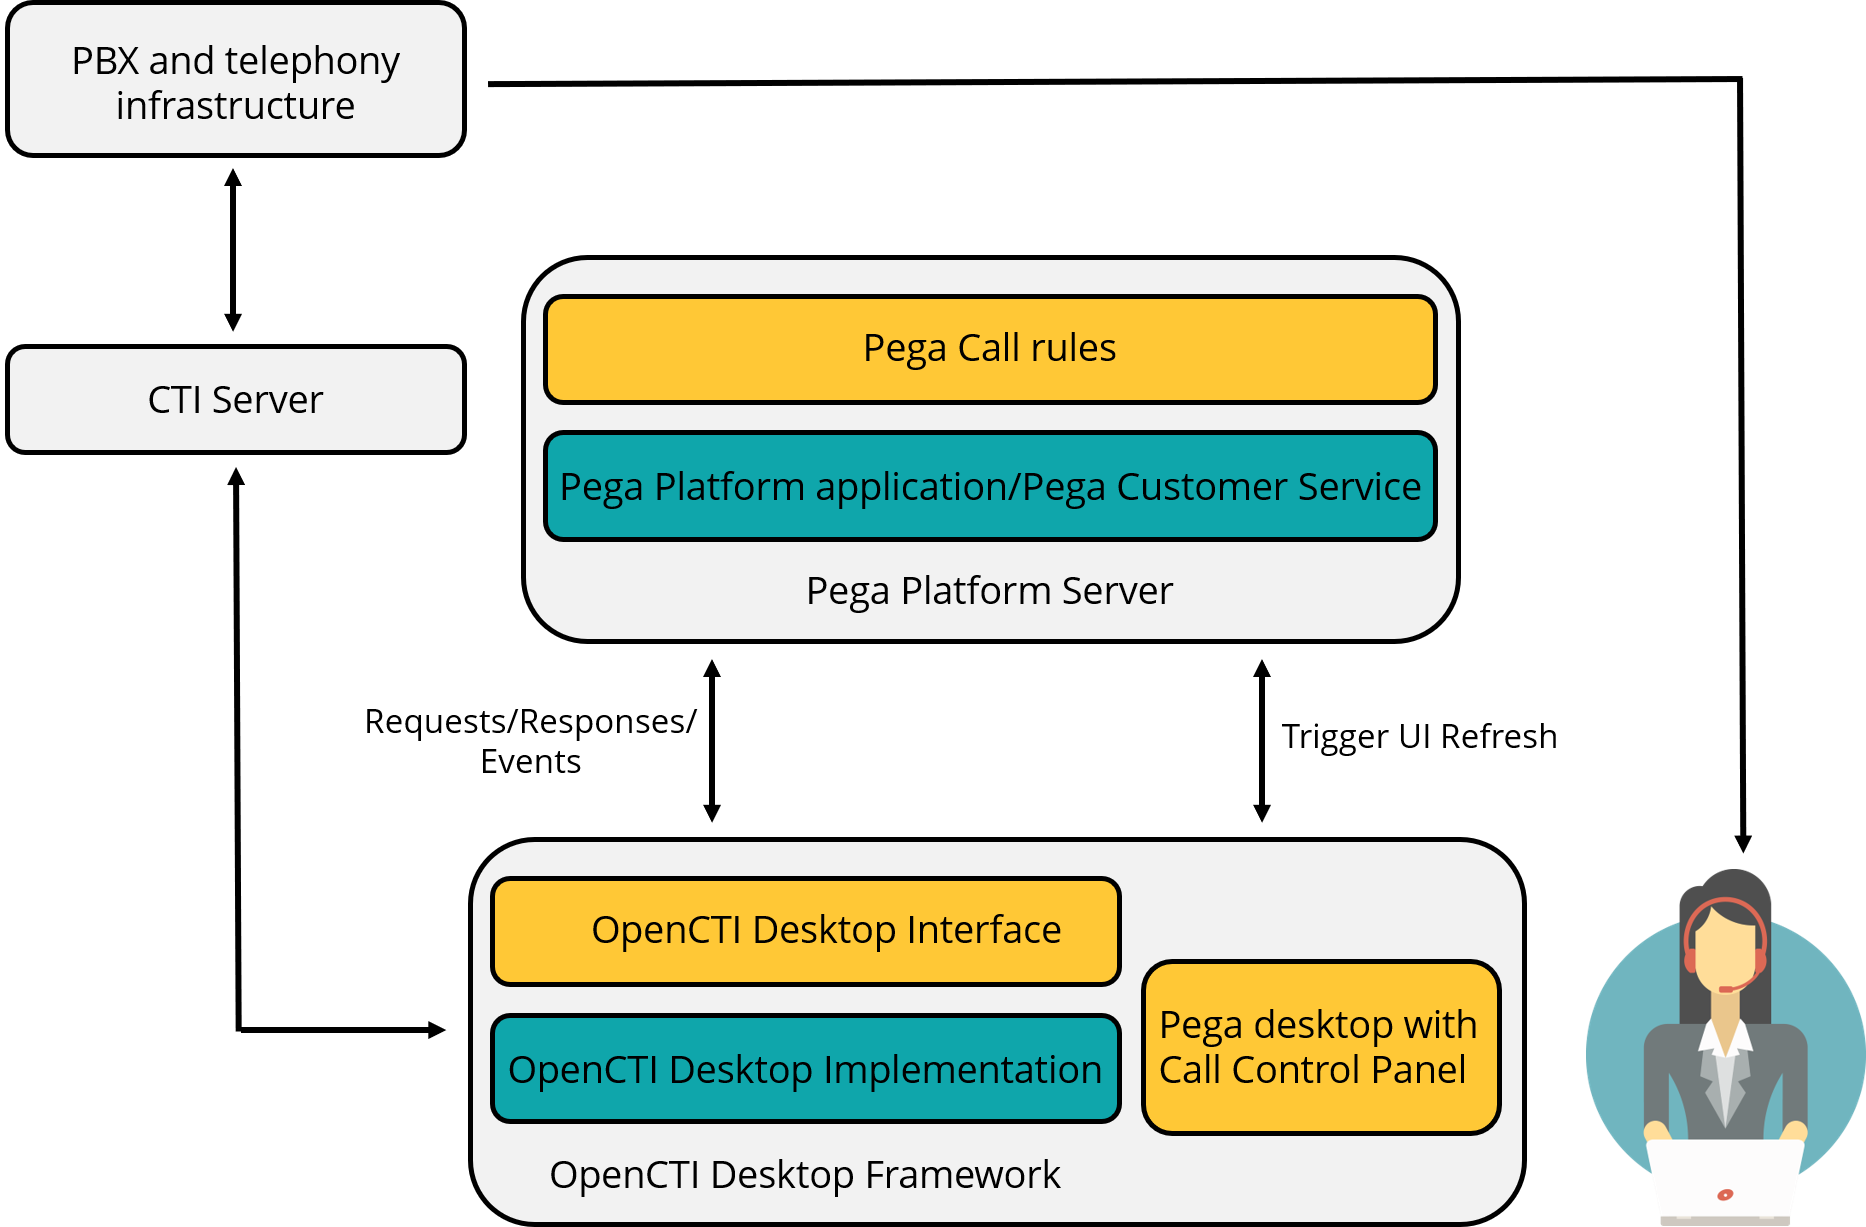 The Pega-provided components in the OpenCTI architecture.